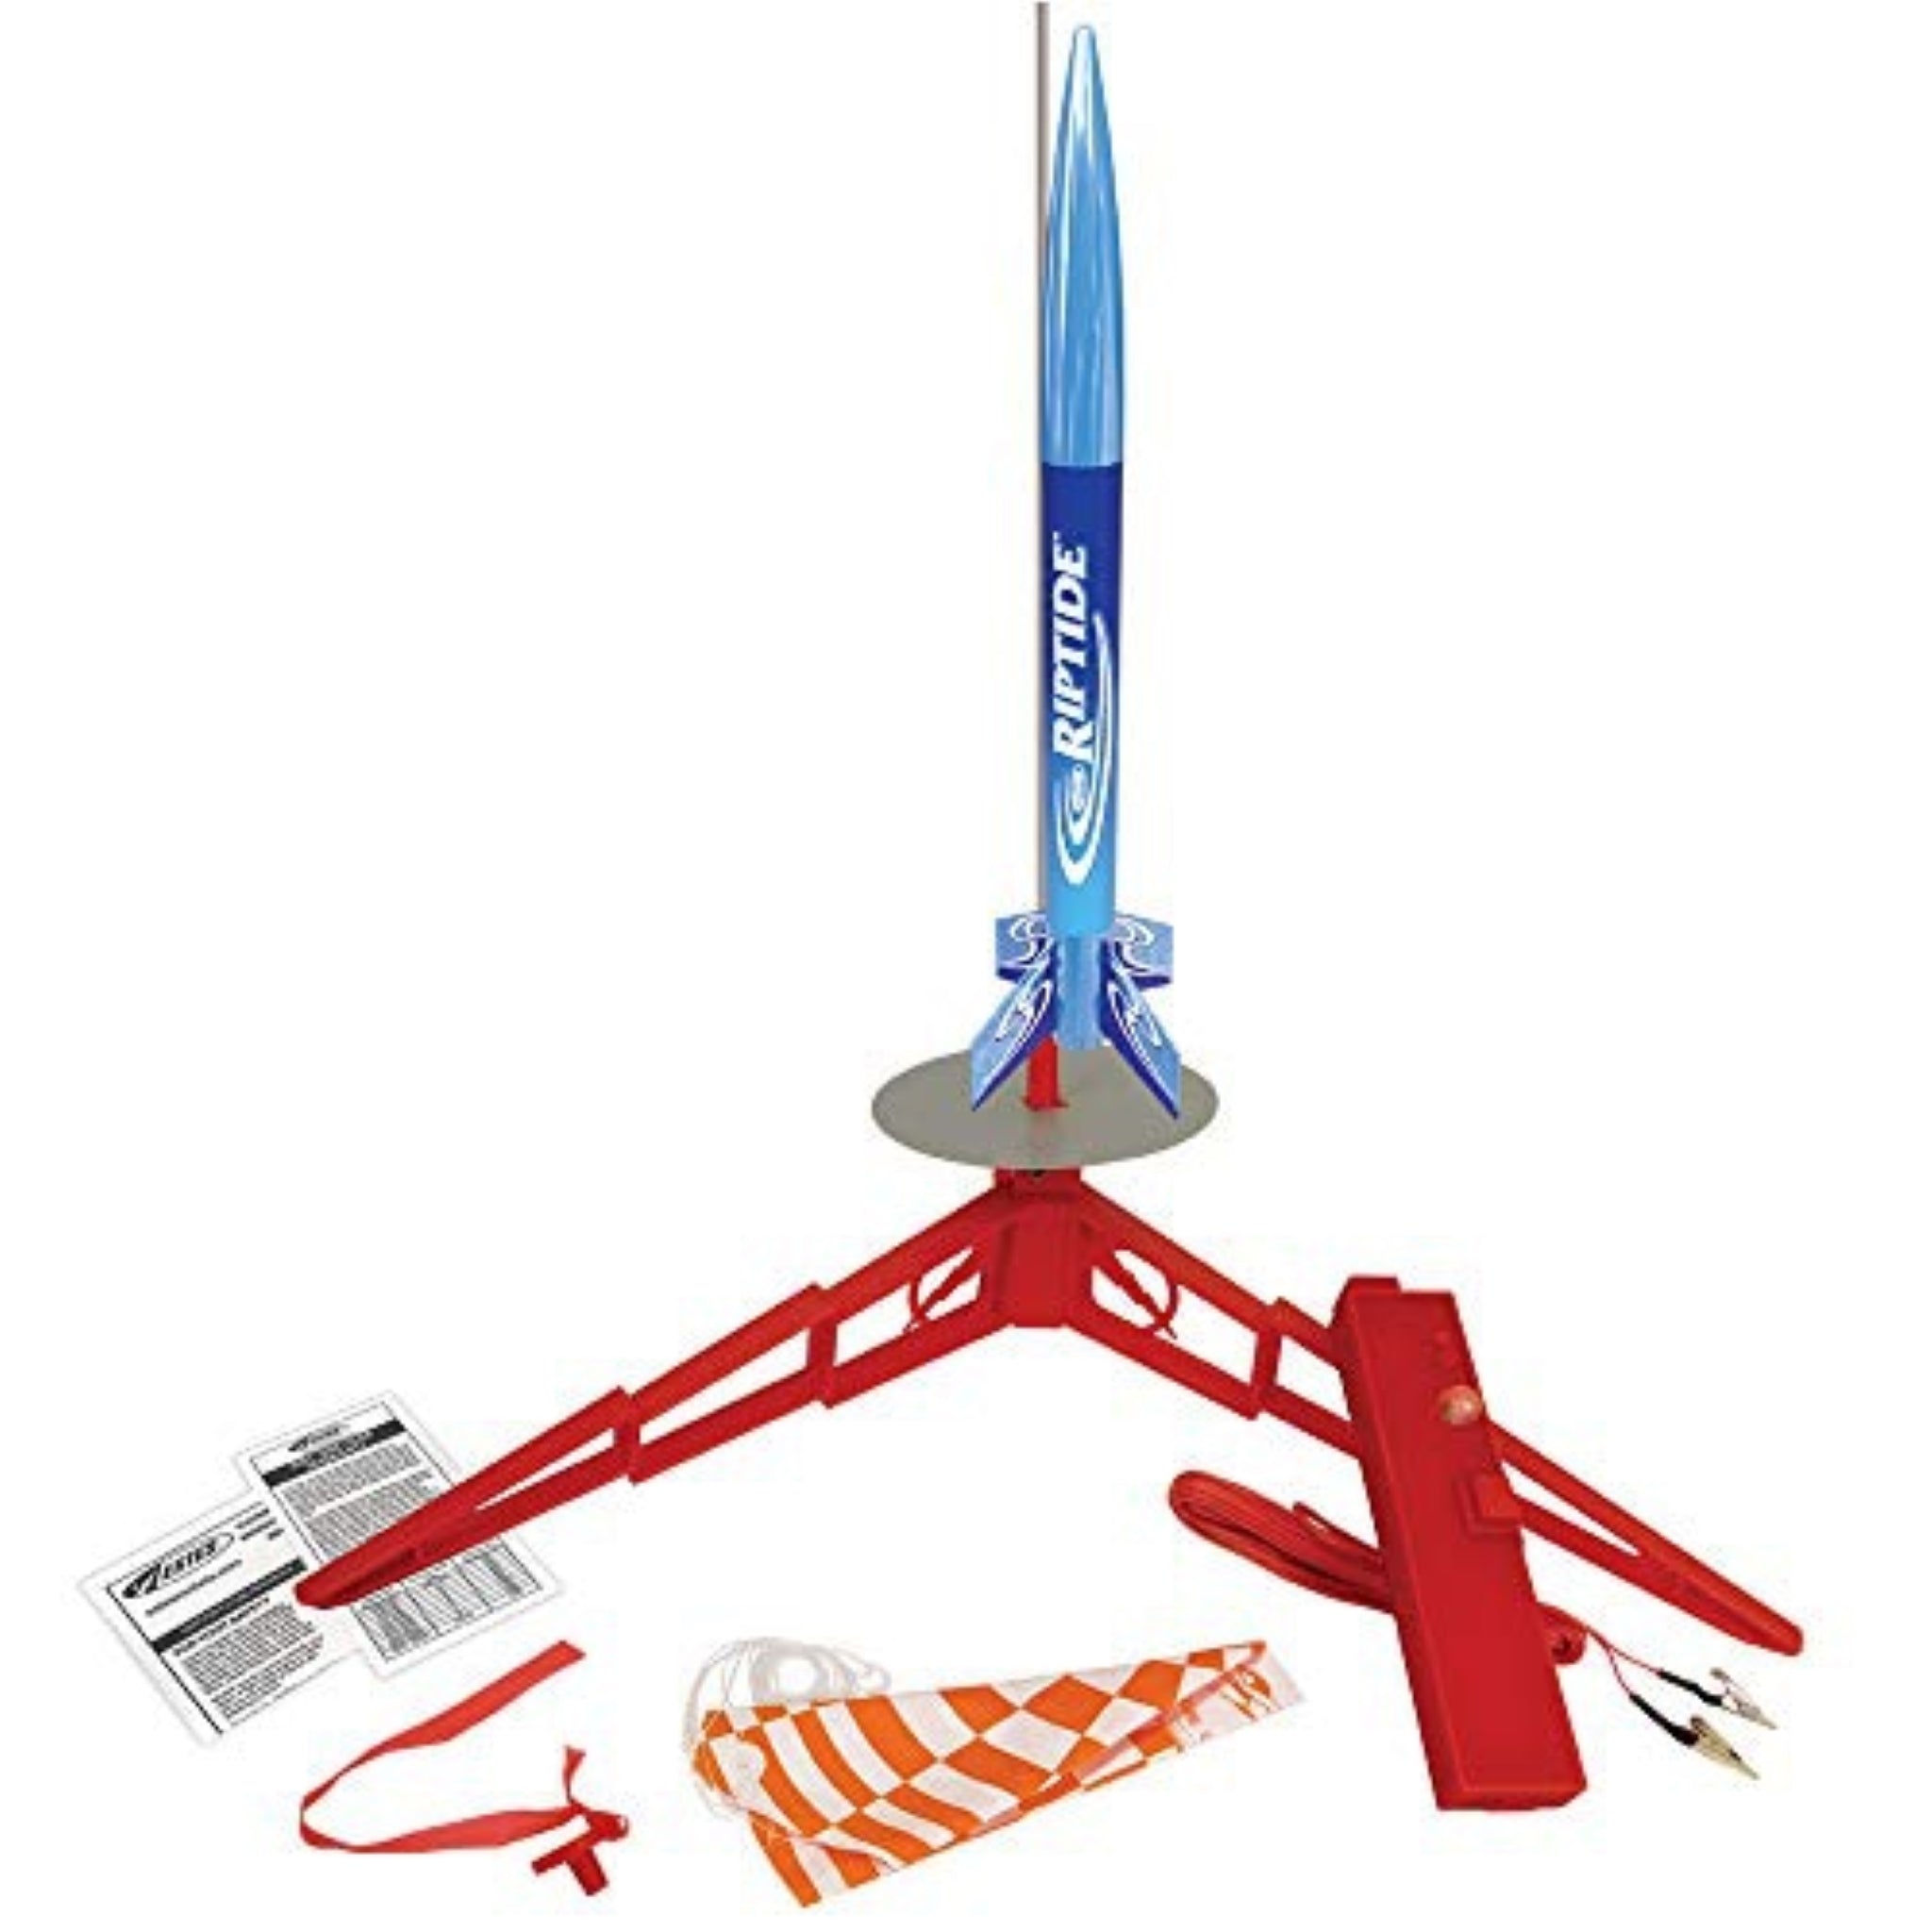 Estes Riptide Launch Set With Rocket Launch Controller And Launch Pad